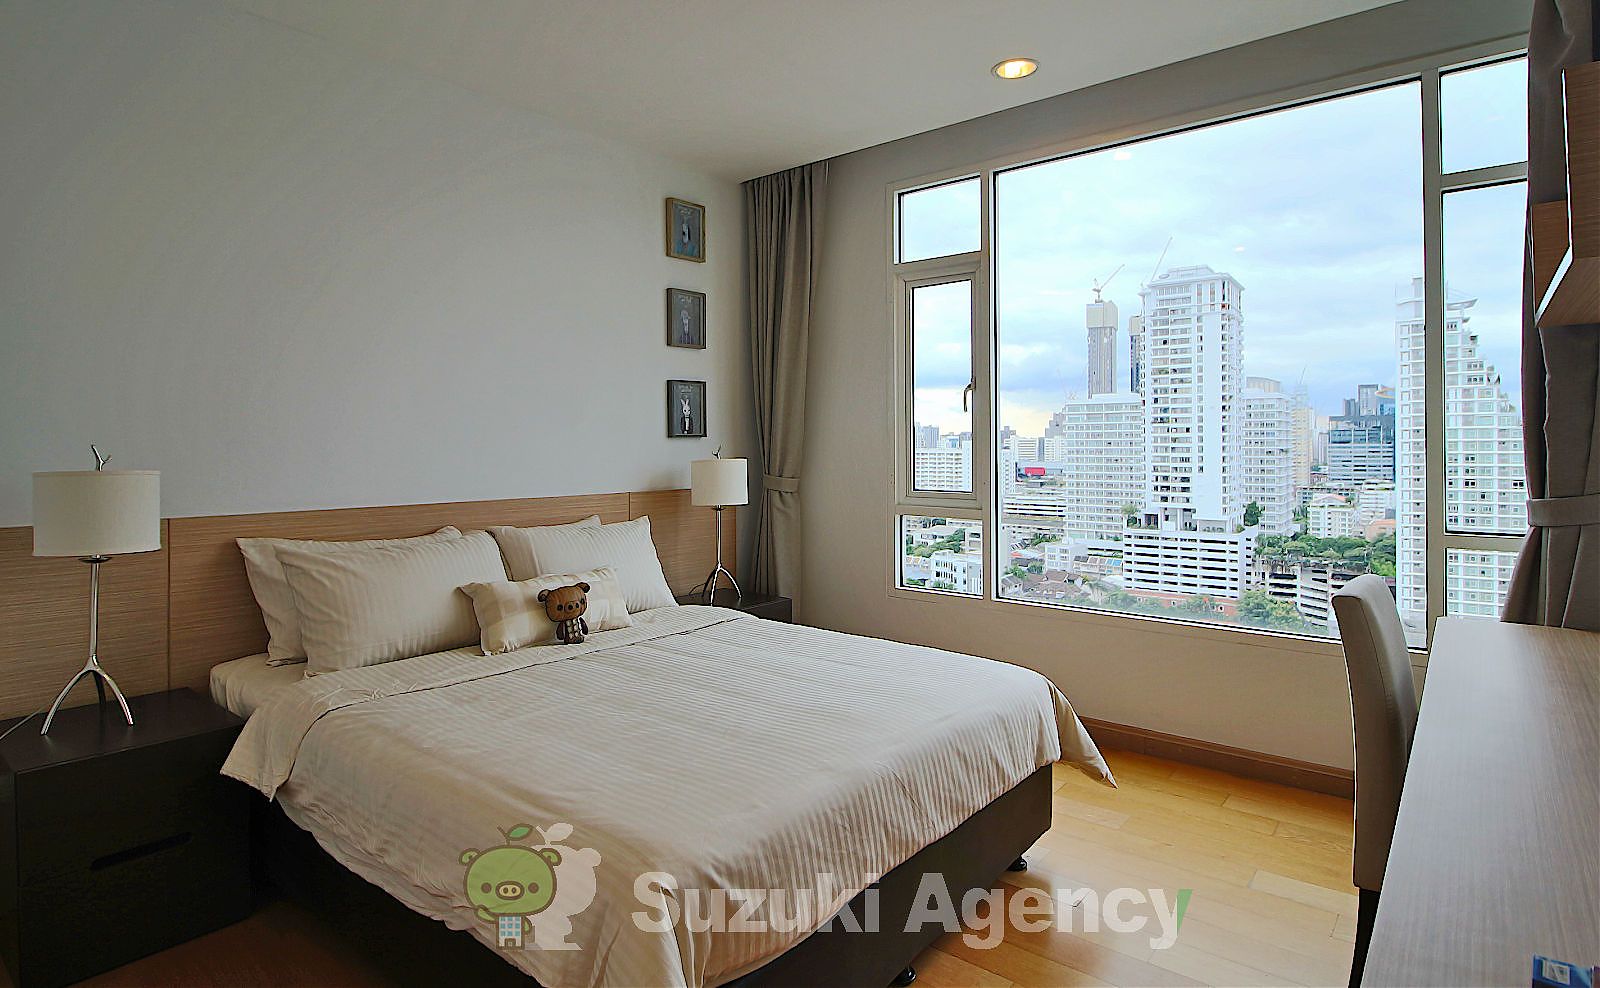 Capital Residence:3Bed Room Photos No.10